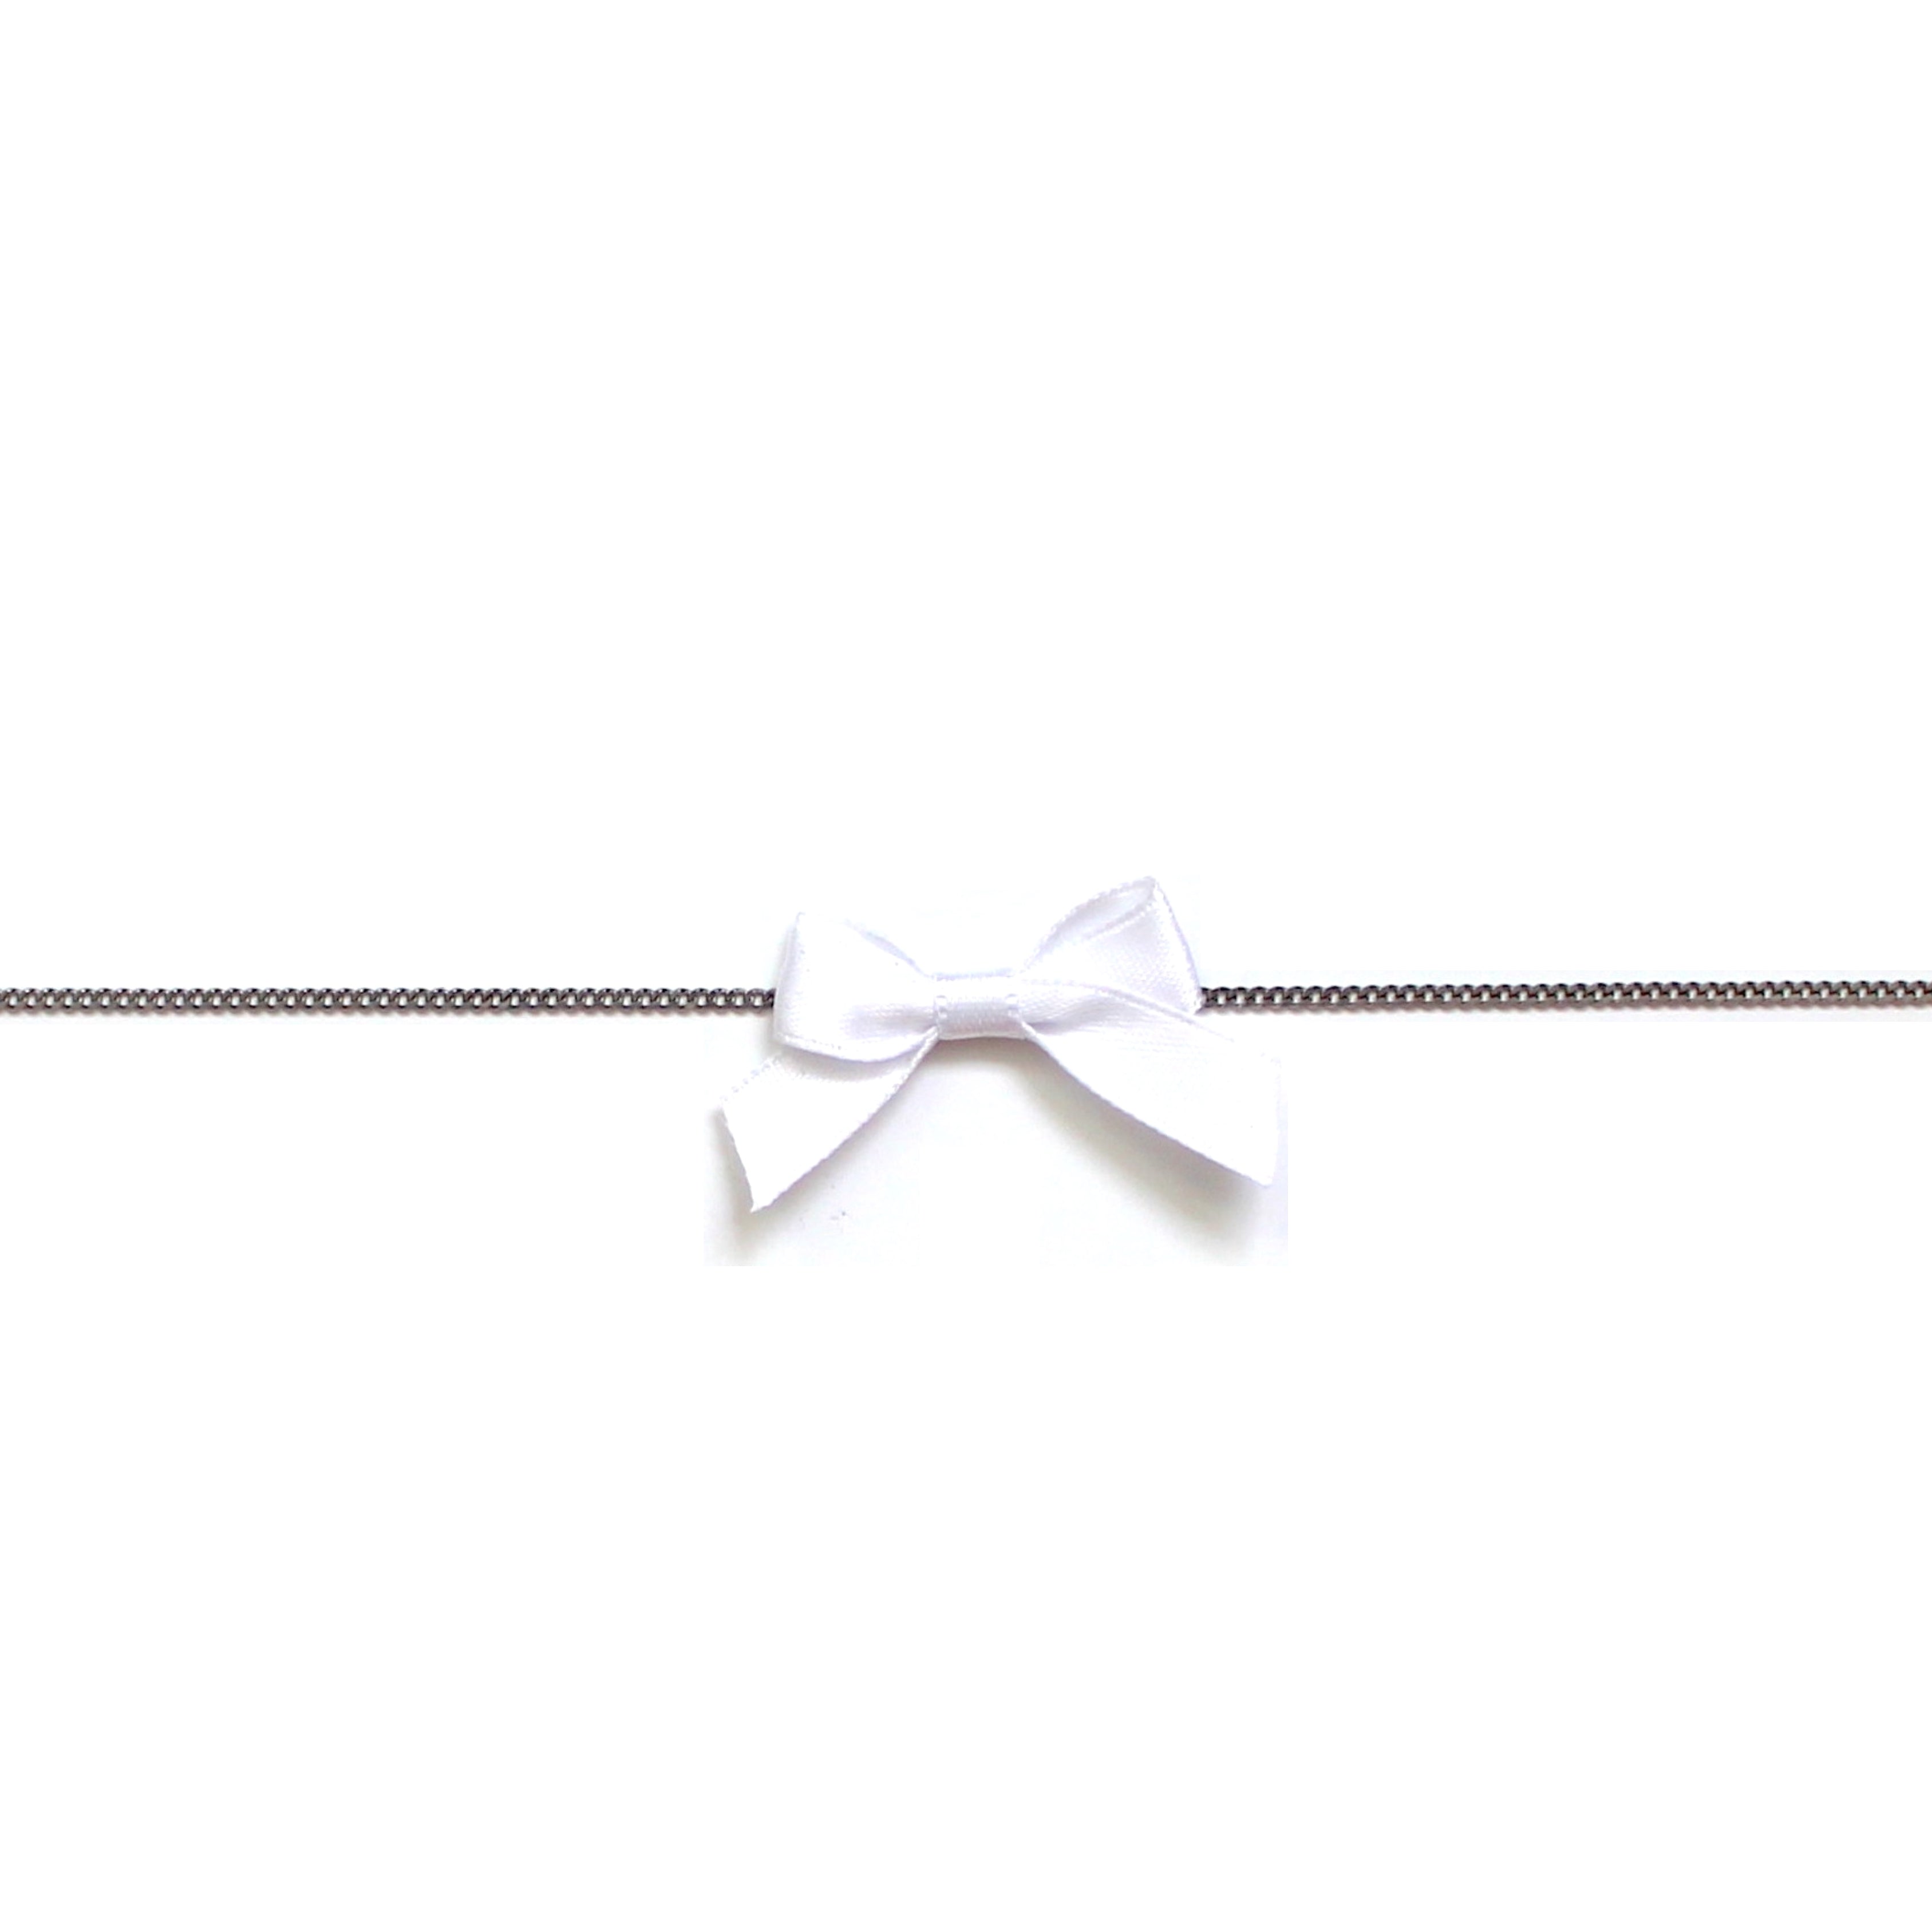 White Honey Bow Belt with White Bow and Silver Chain